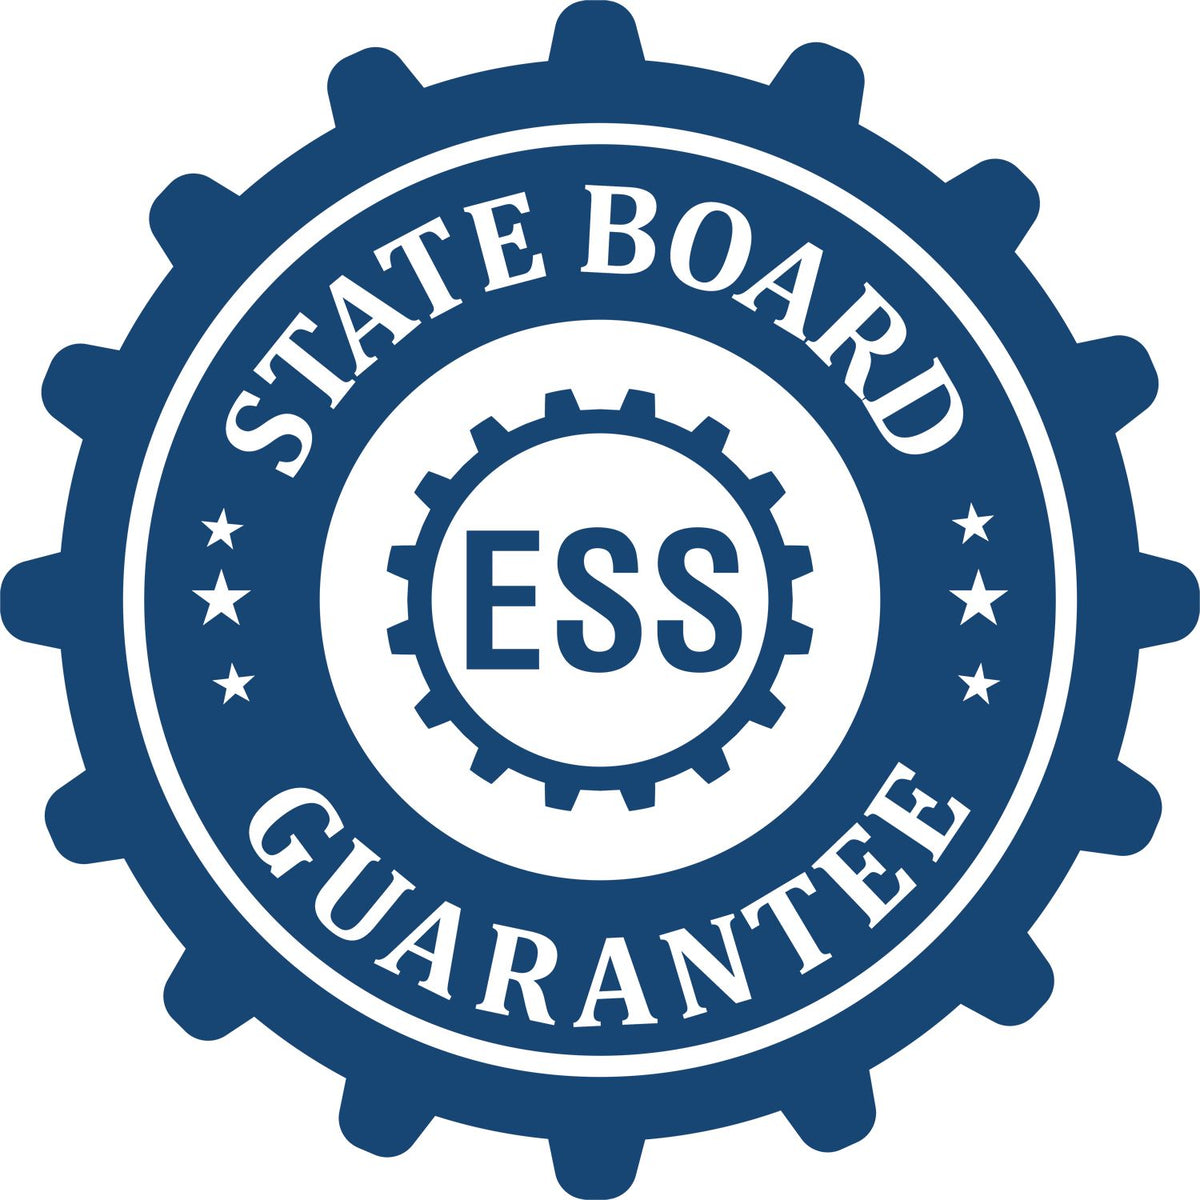 An emblem in a gear shape illustrating a state board guarantee for the Hybrid Minnesota Architect Seal